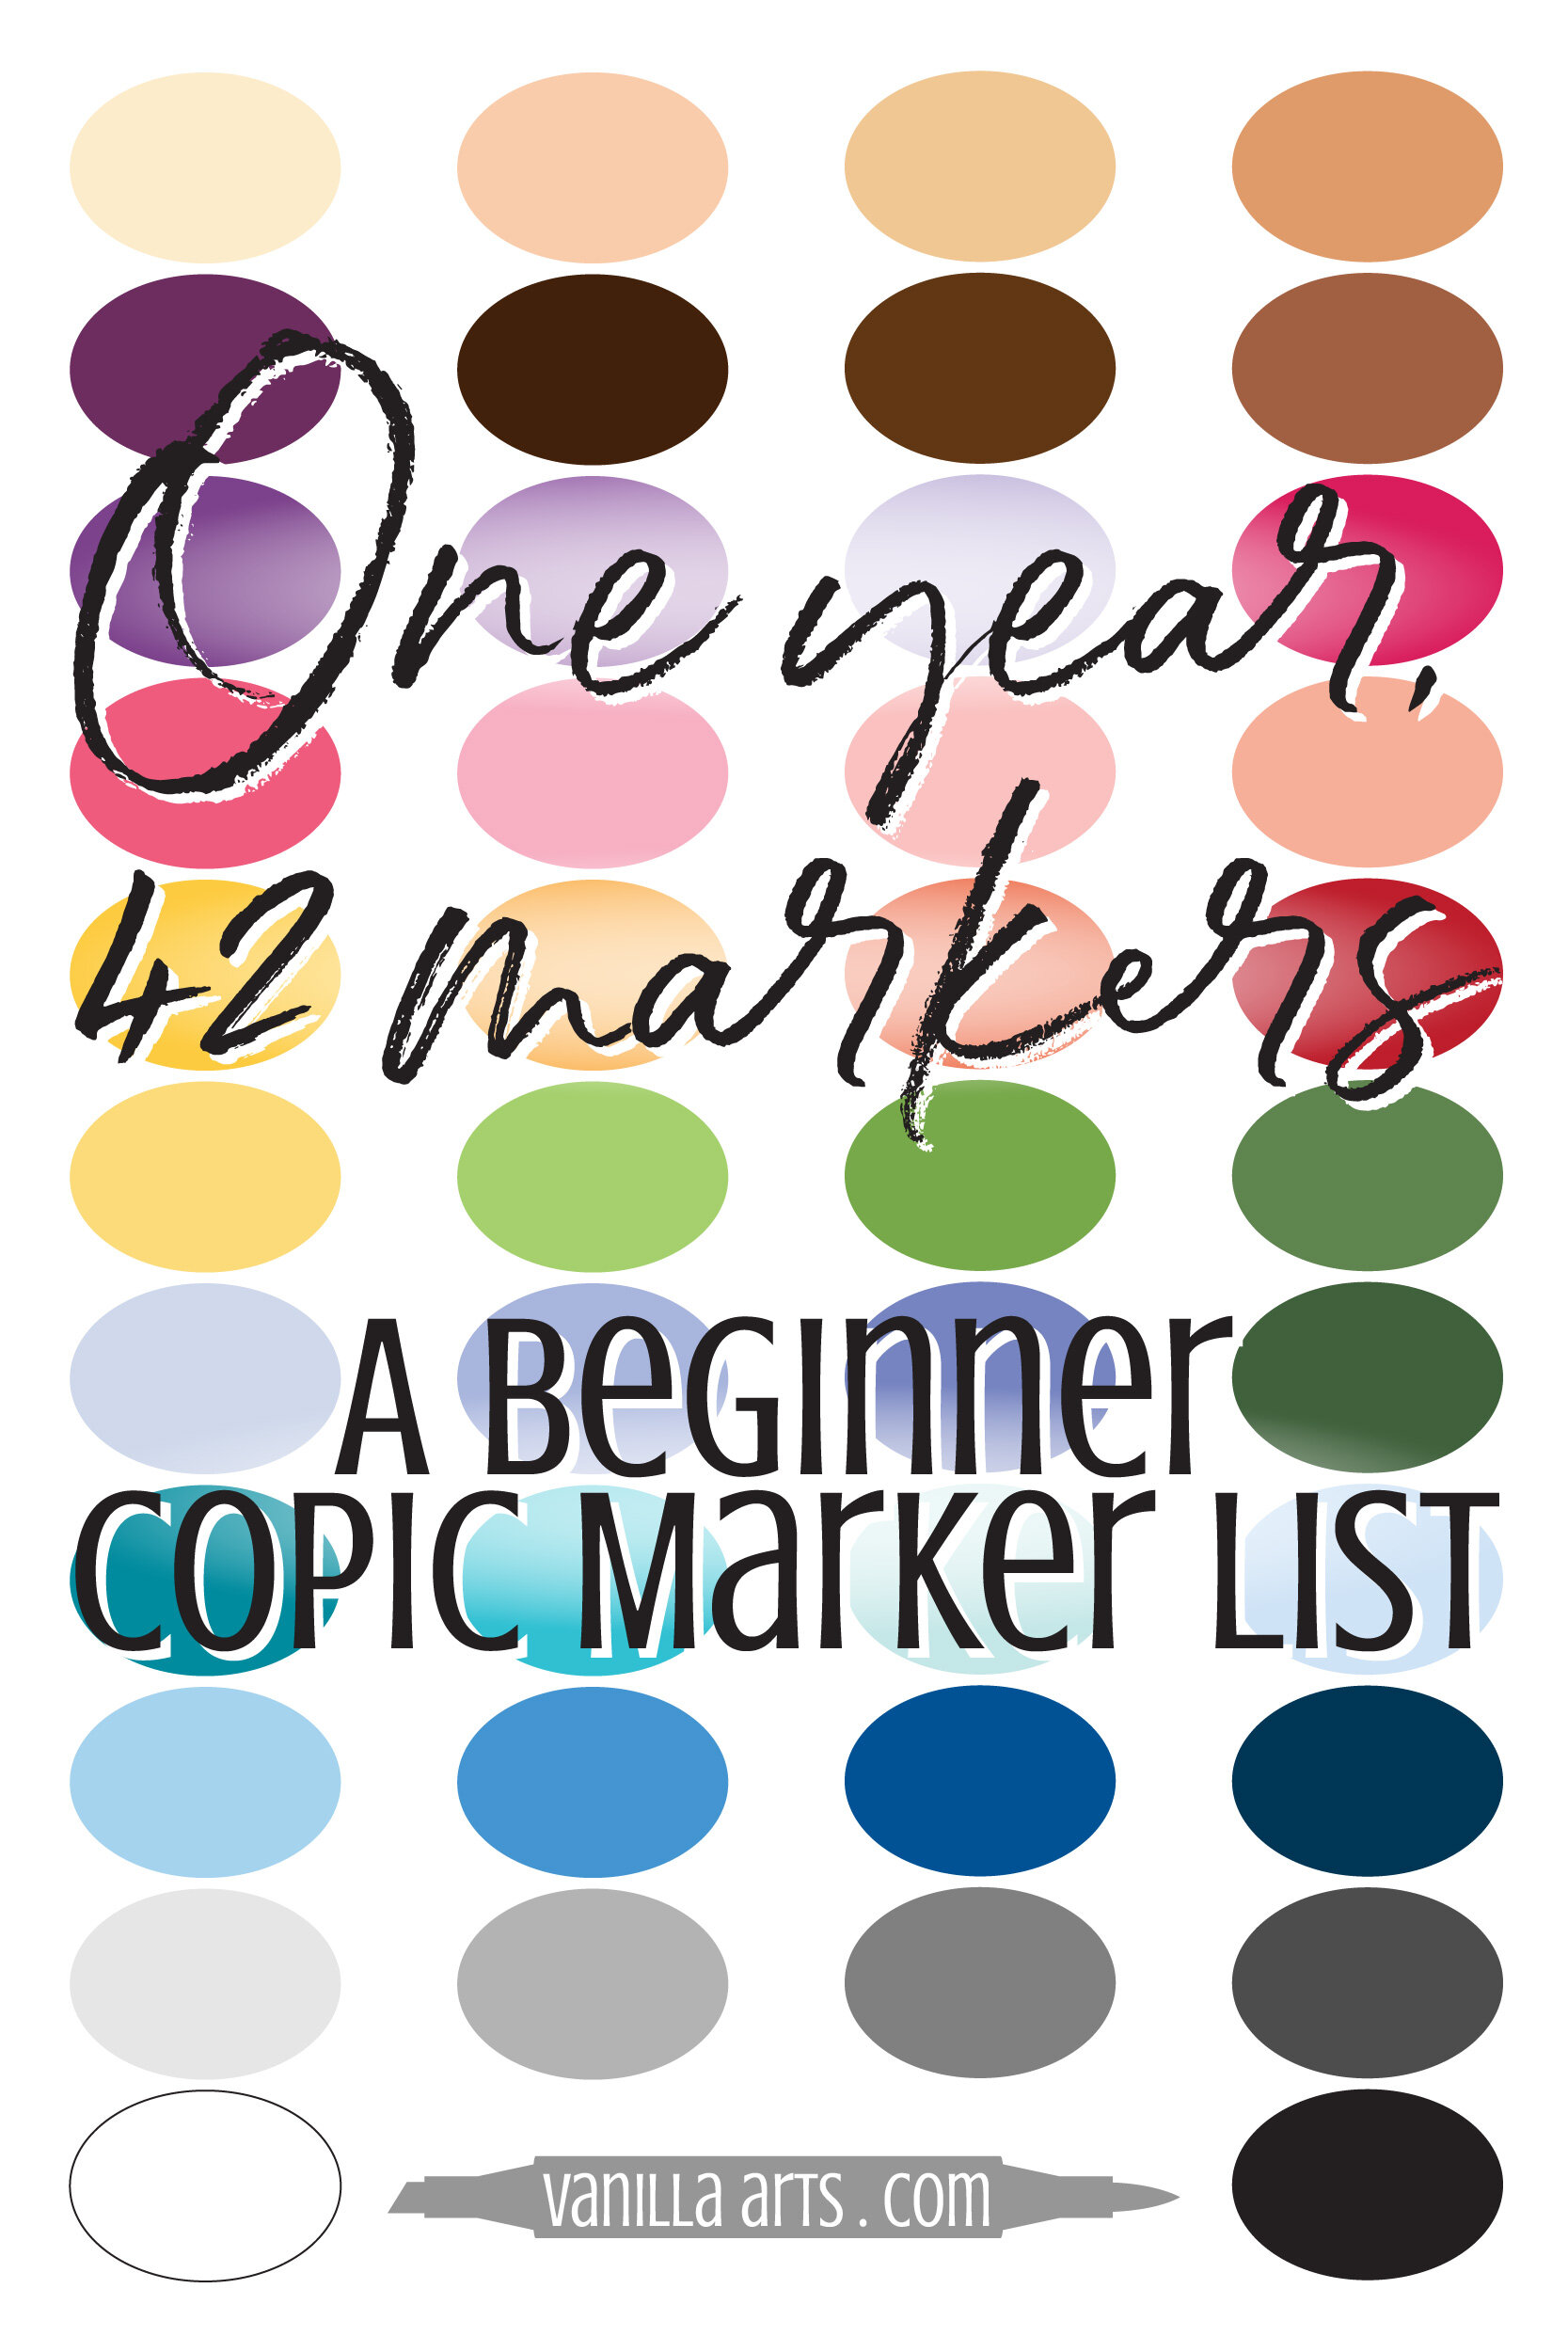 Best Markers For Coloring - Top 7 Best Coloring Markers To Get Started 